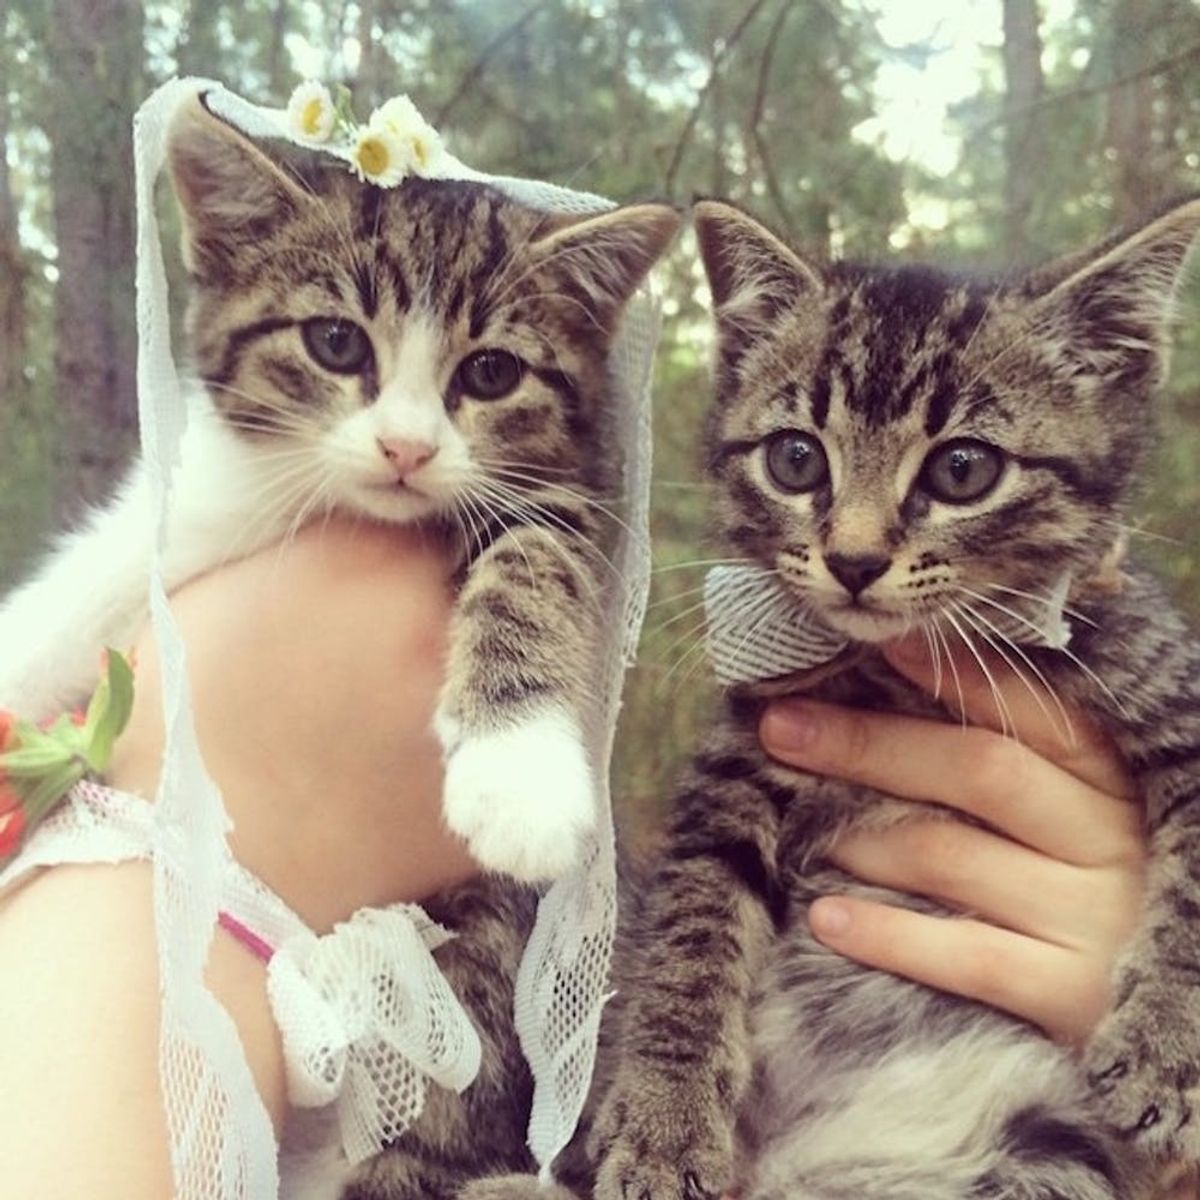 14 Pet Weddings That Give Us All the Feels